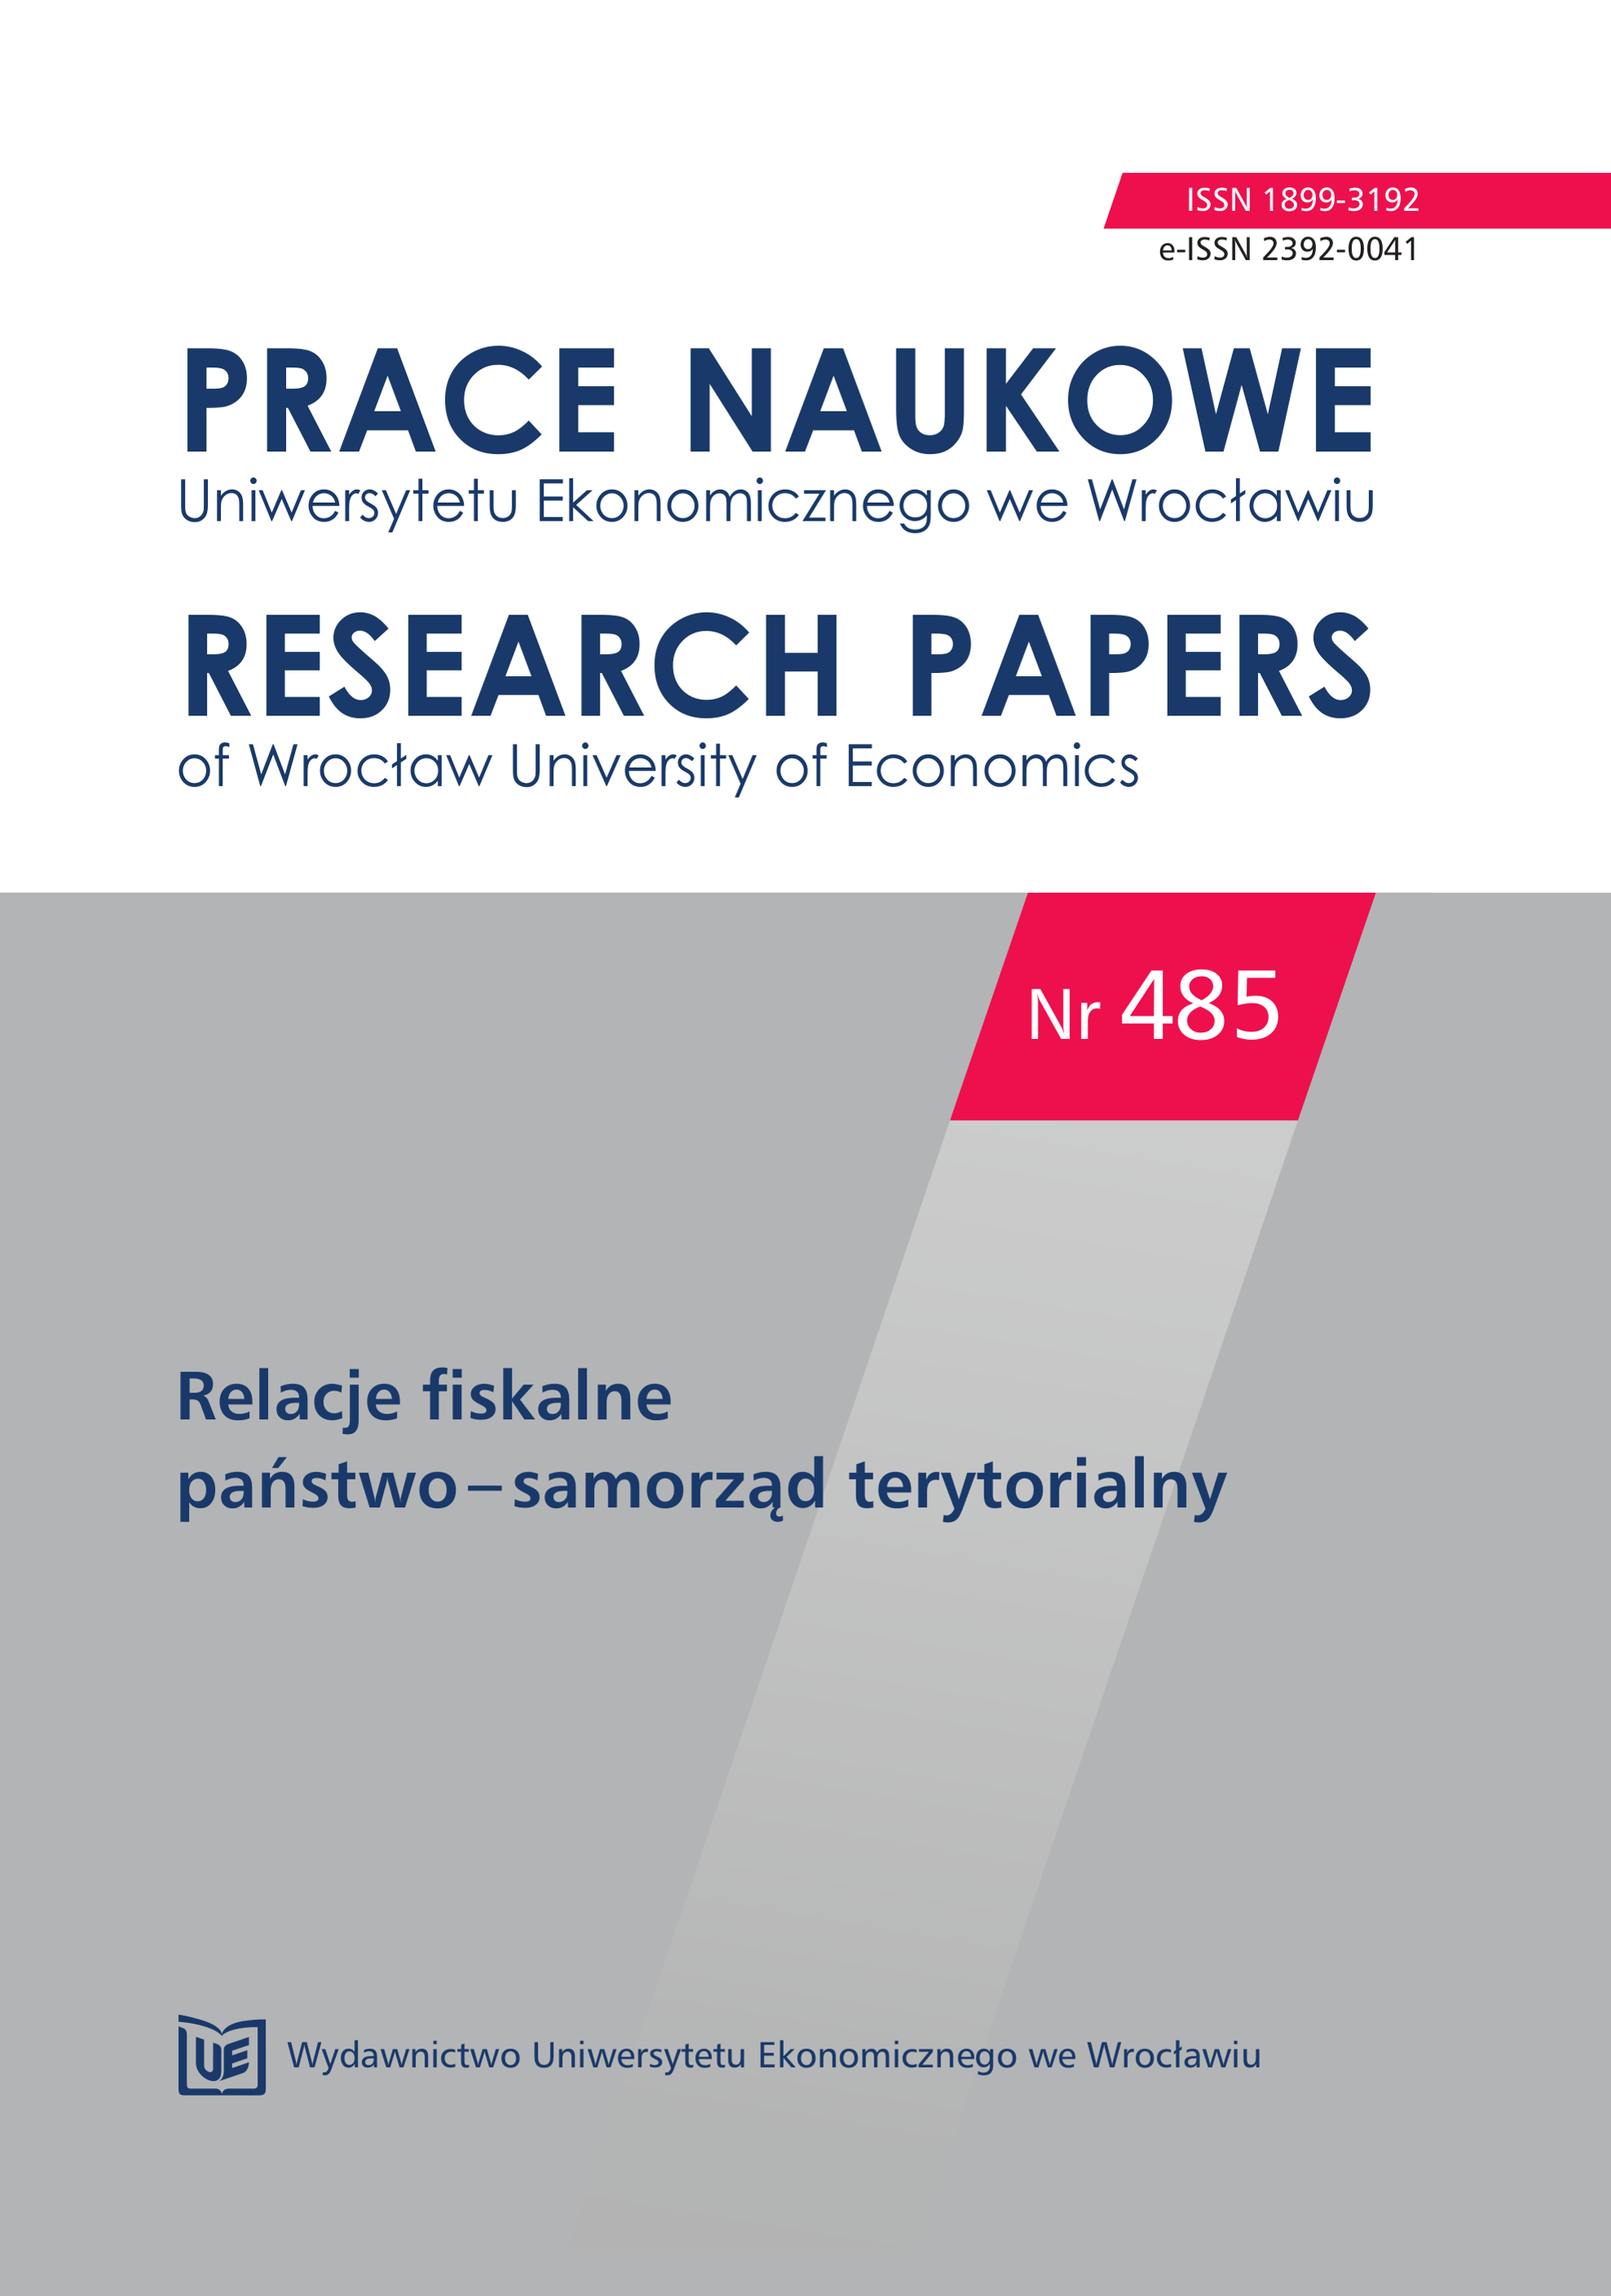 Significance of shares in proceeds in income taxes being an income of state budget for territorial self-government units in Poland in 2010–2015 Cover Image